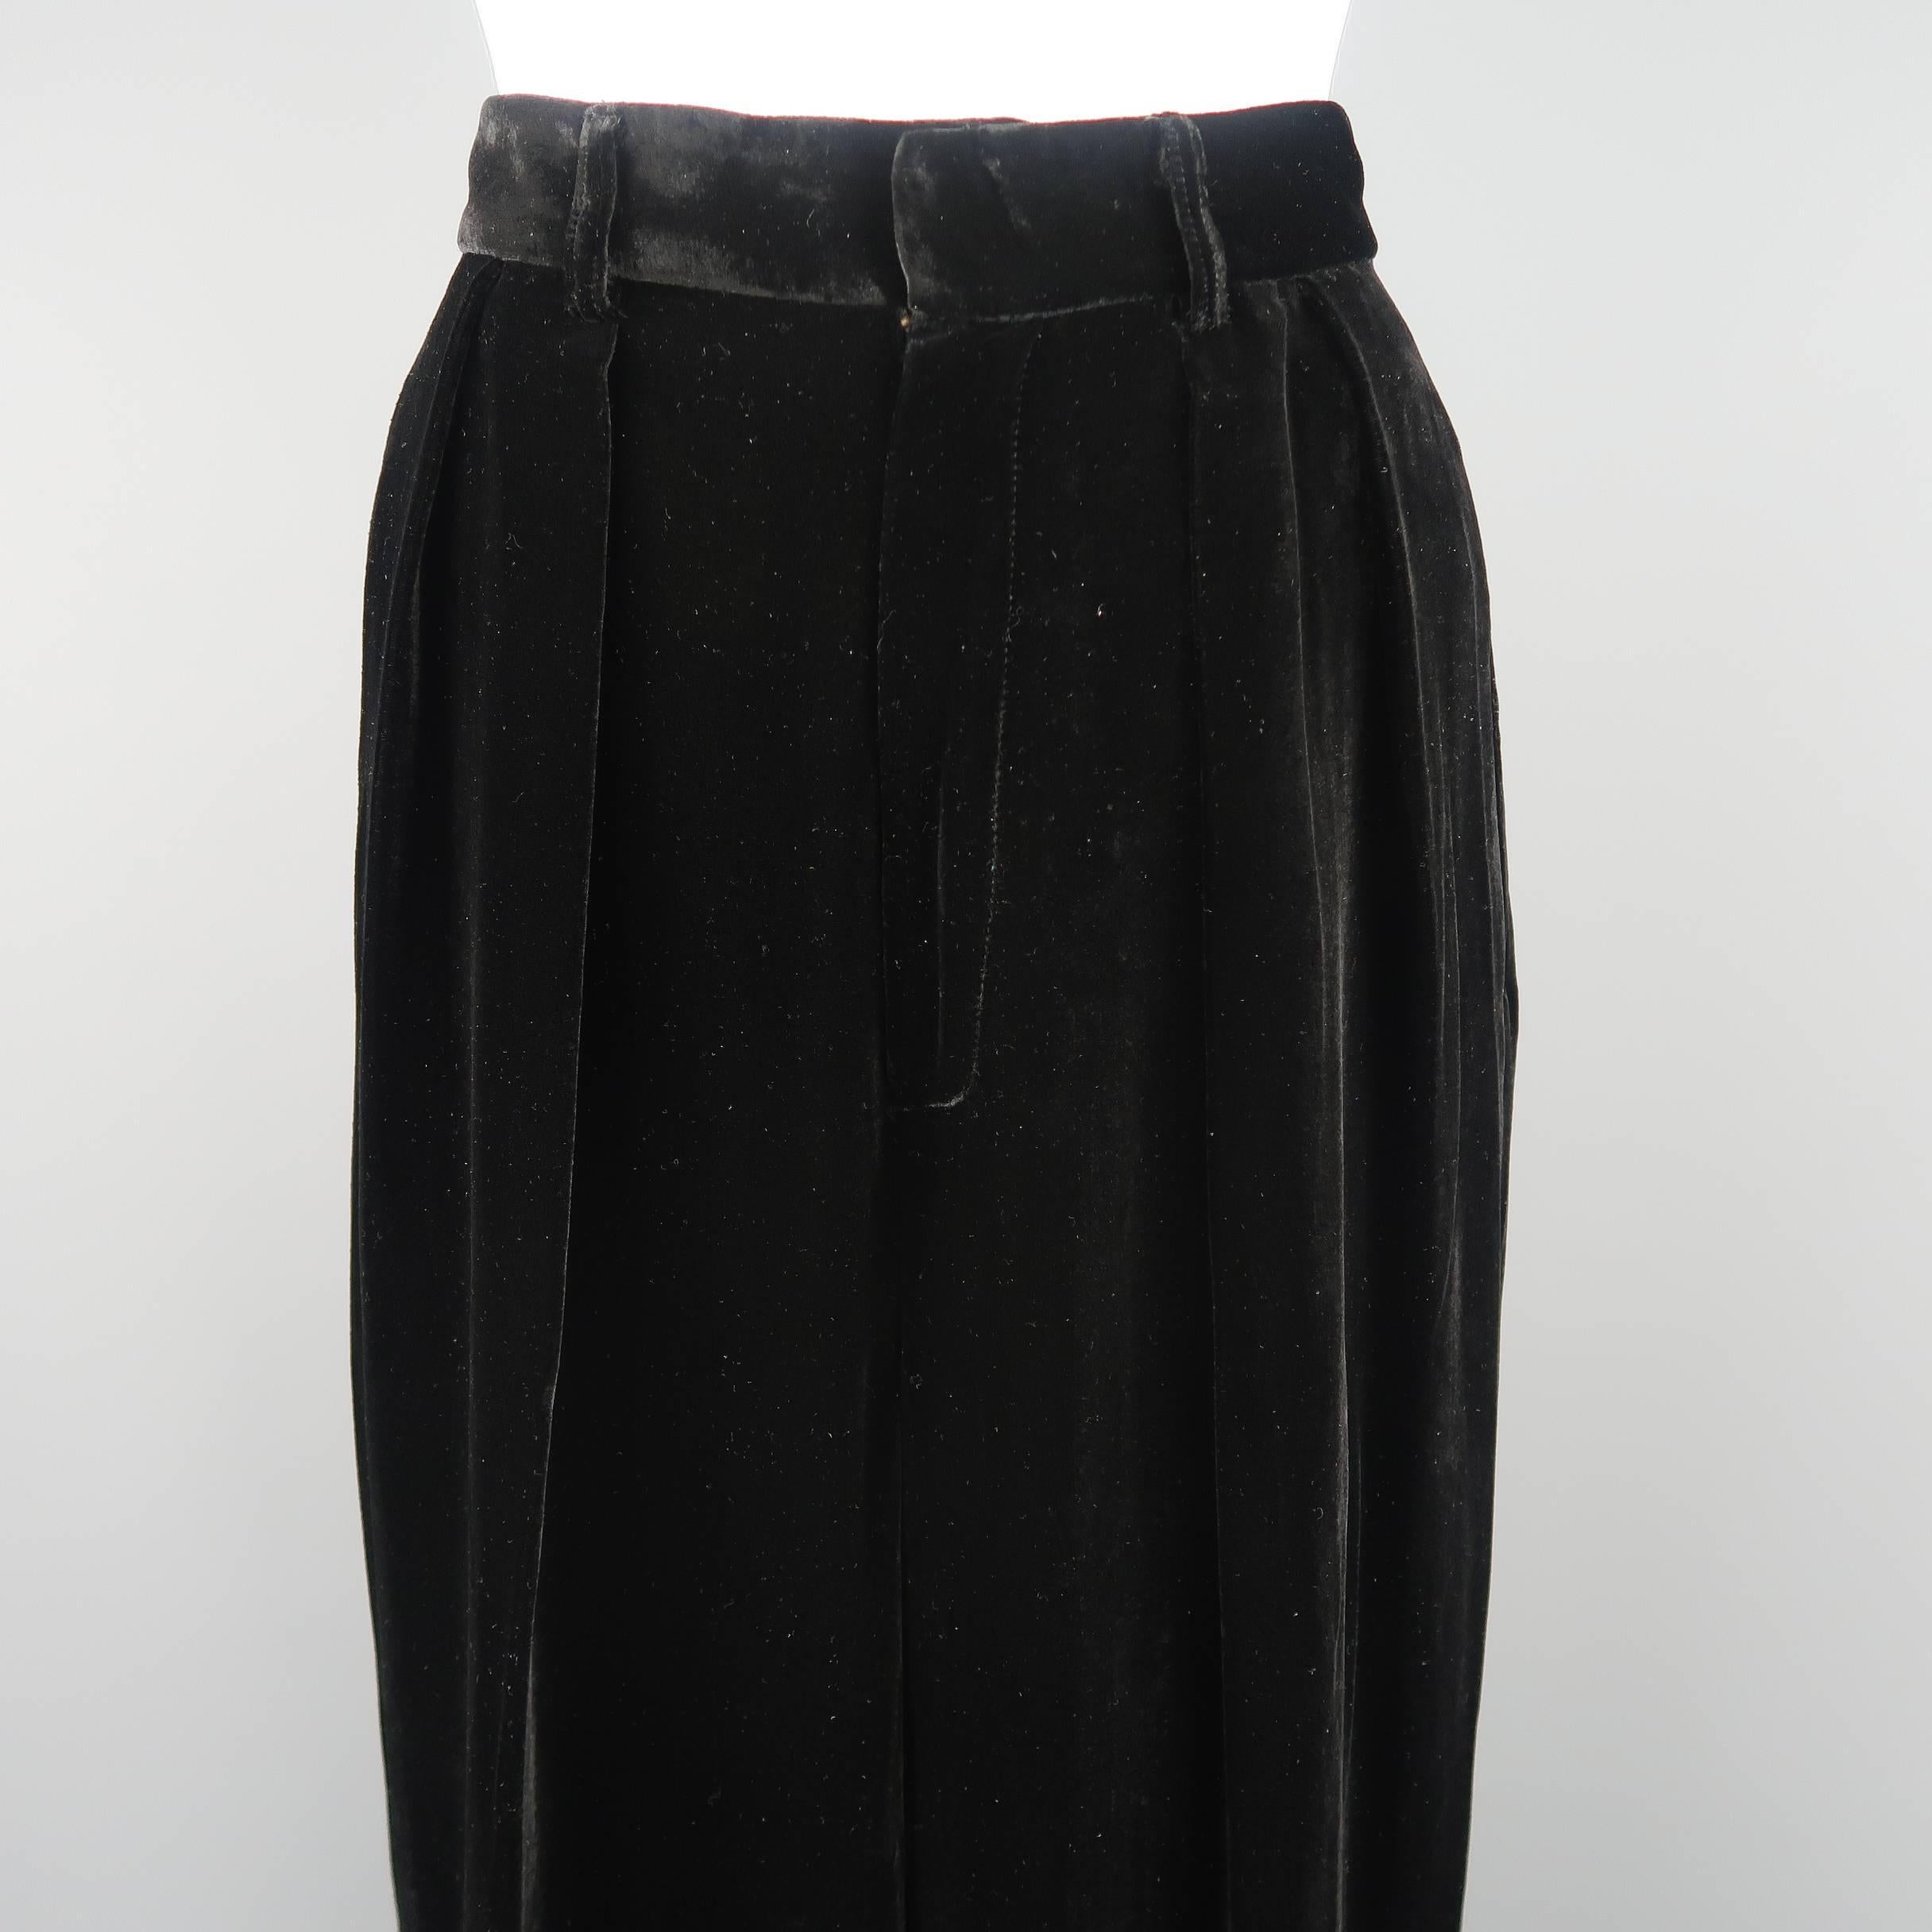 Vintage DONNA KARAN dress pants come in black silk blend velvet with a high rise, double pleats, and cuffed hem.
 
Excellent Pre-Owned Condition.
Marked: 8
 
Measurements:
 
Waist: 27 in.
Rise: 13 in.
Inseam: 31 in.
